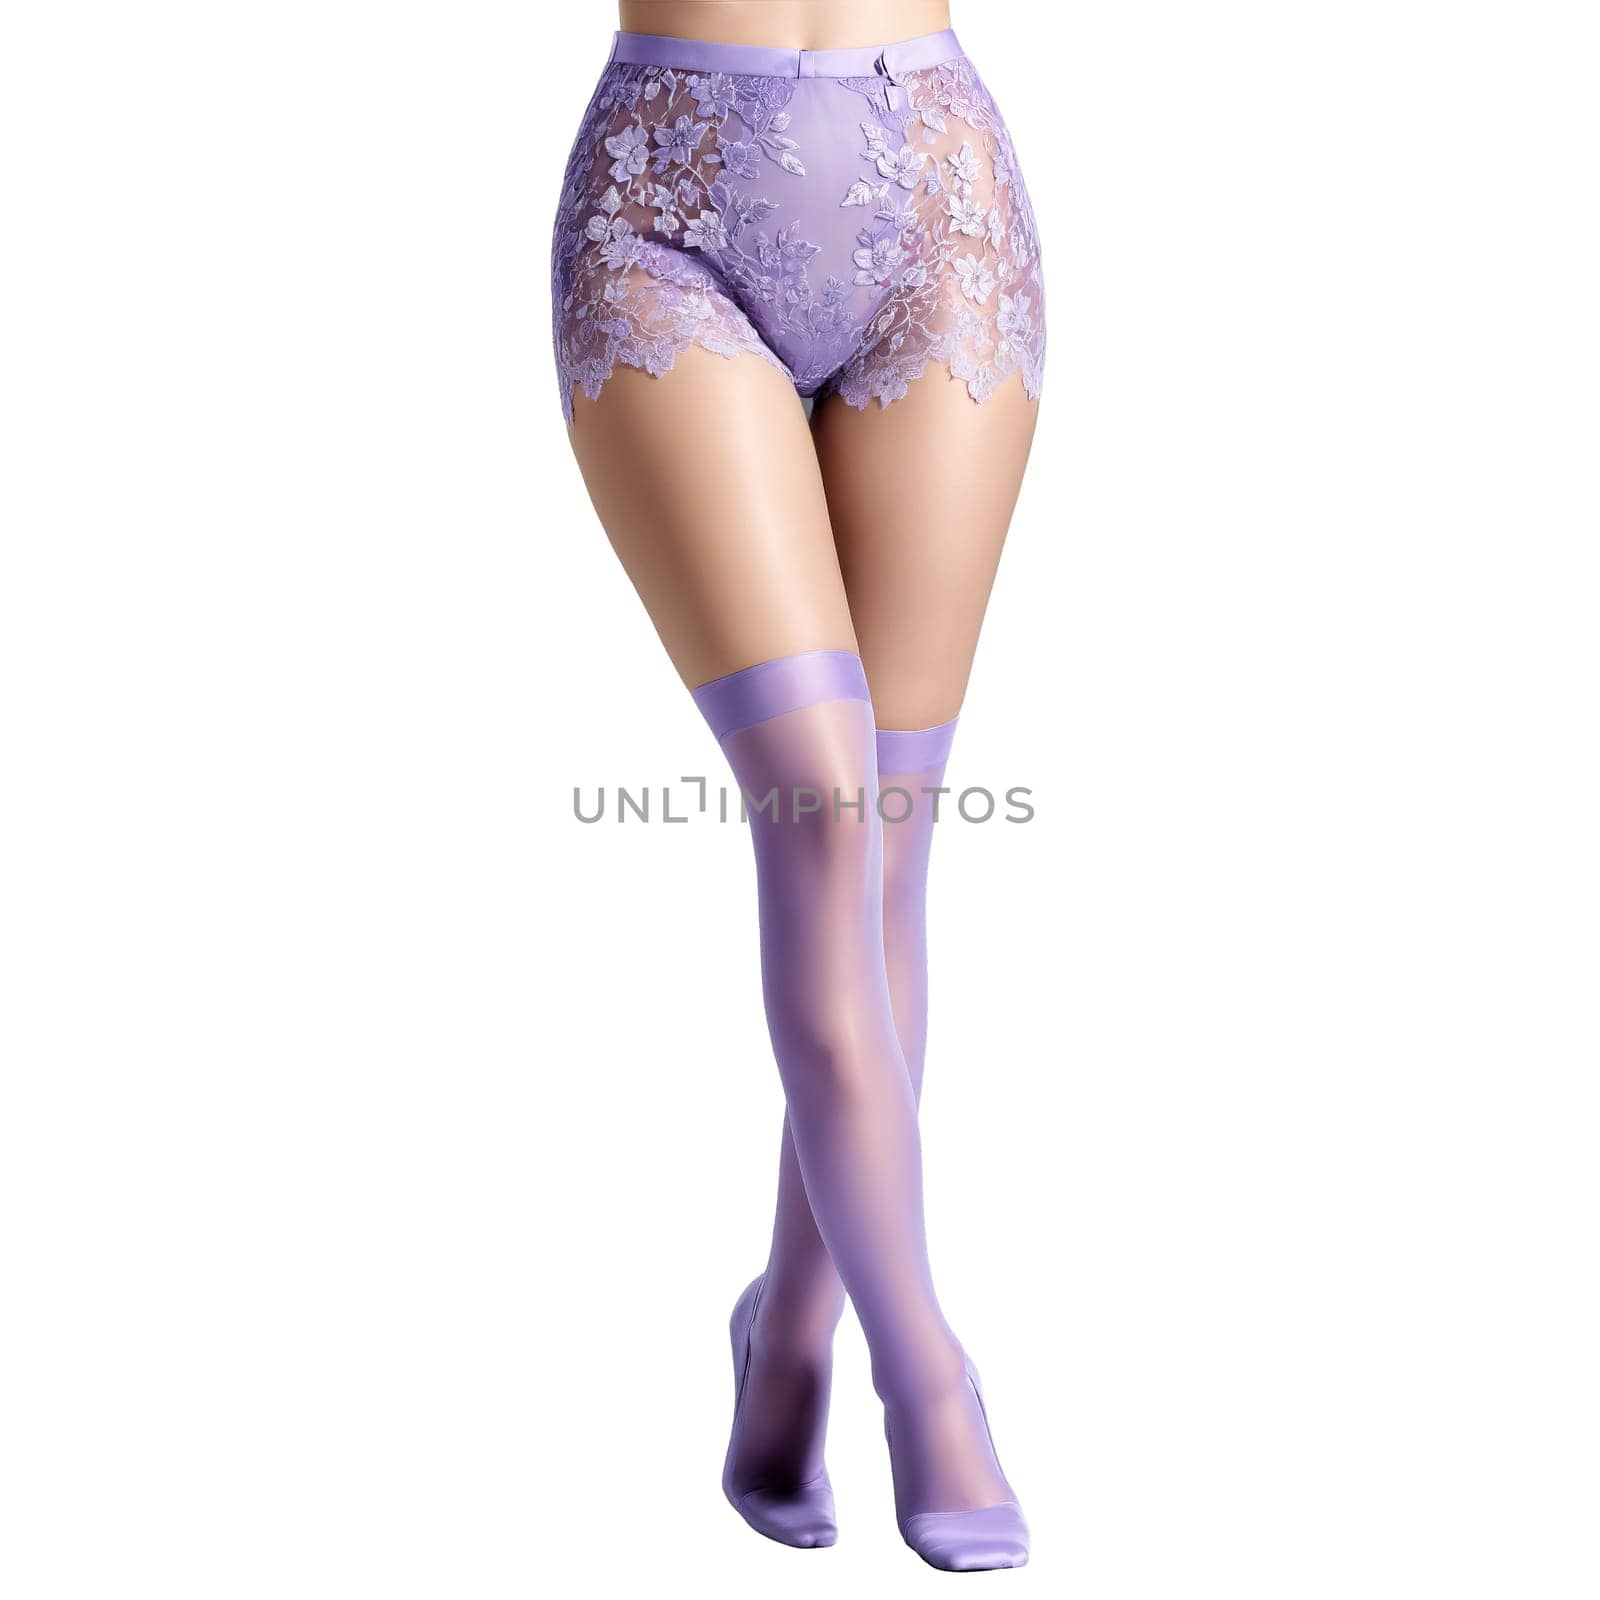 Shimmery lavender stockings Dreamy female legs in shimmery lavender stockings with a delicate floral pattern by panophotograph